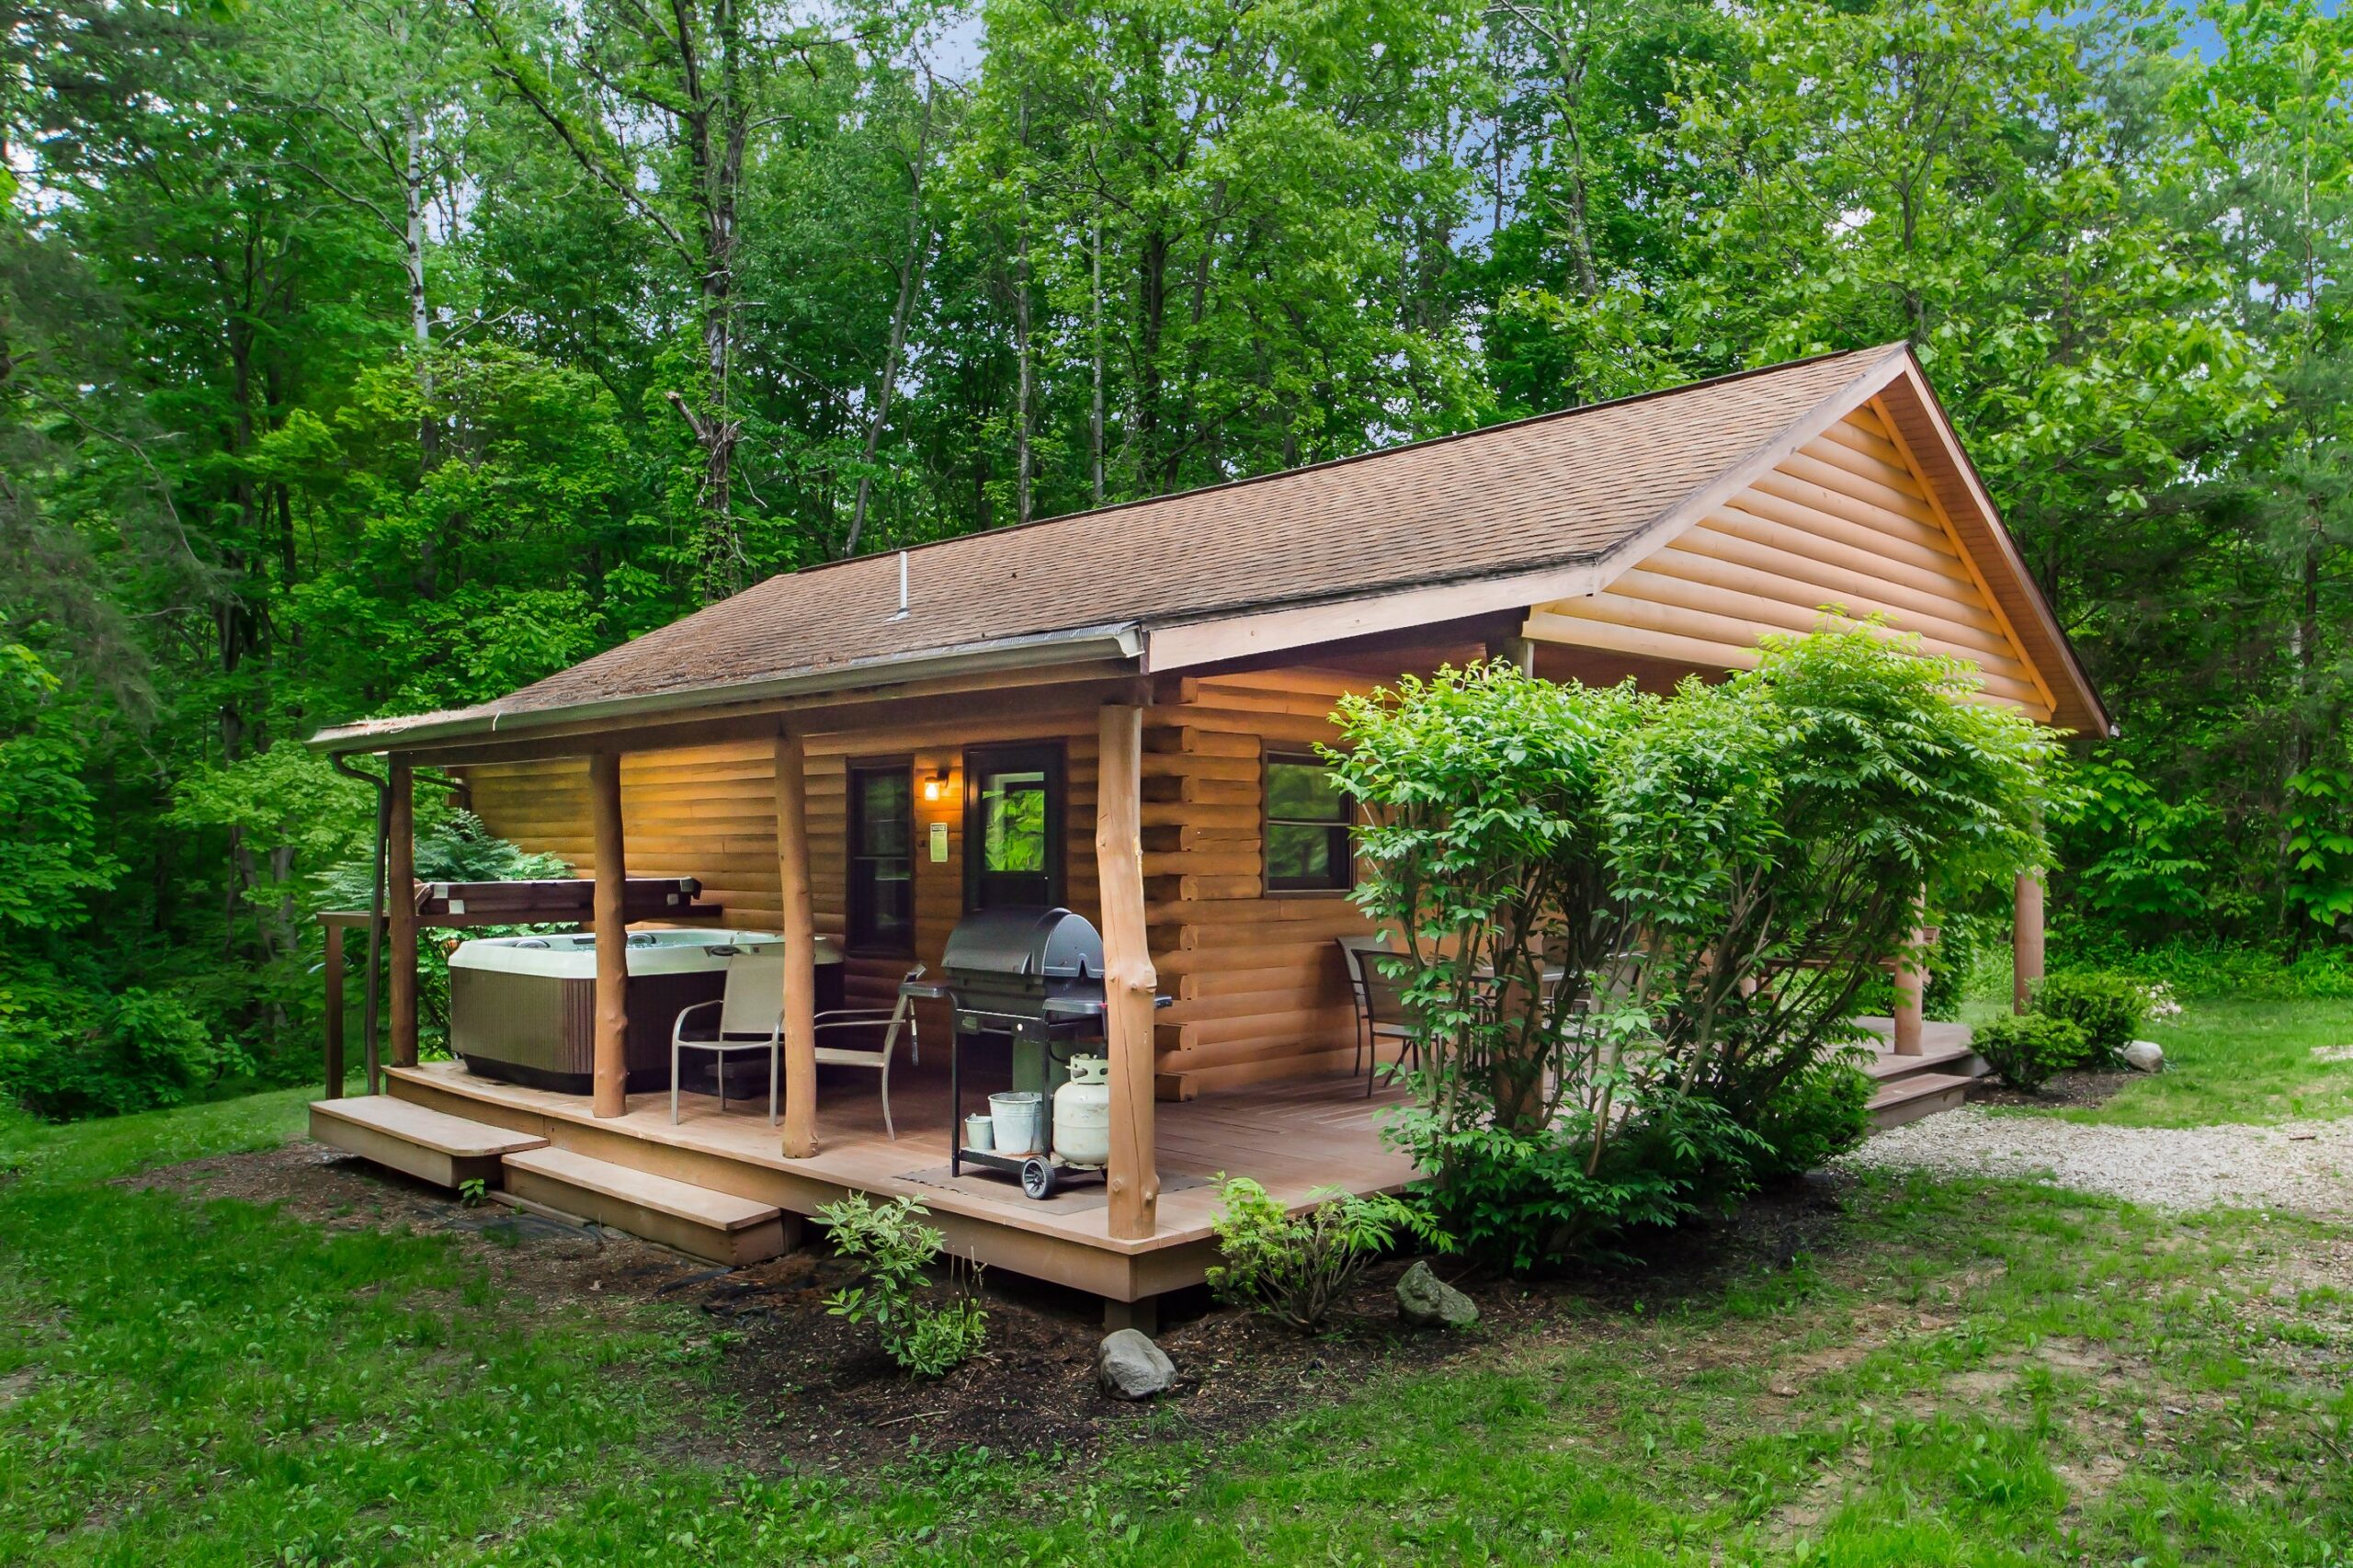 Small cabin with a hot tub and grill on front deck surrounded by trees and greenery.